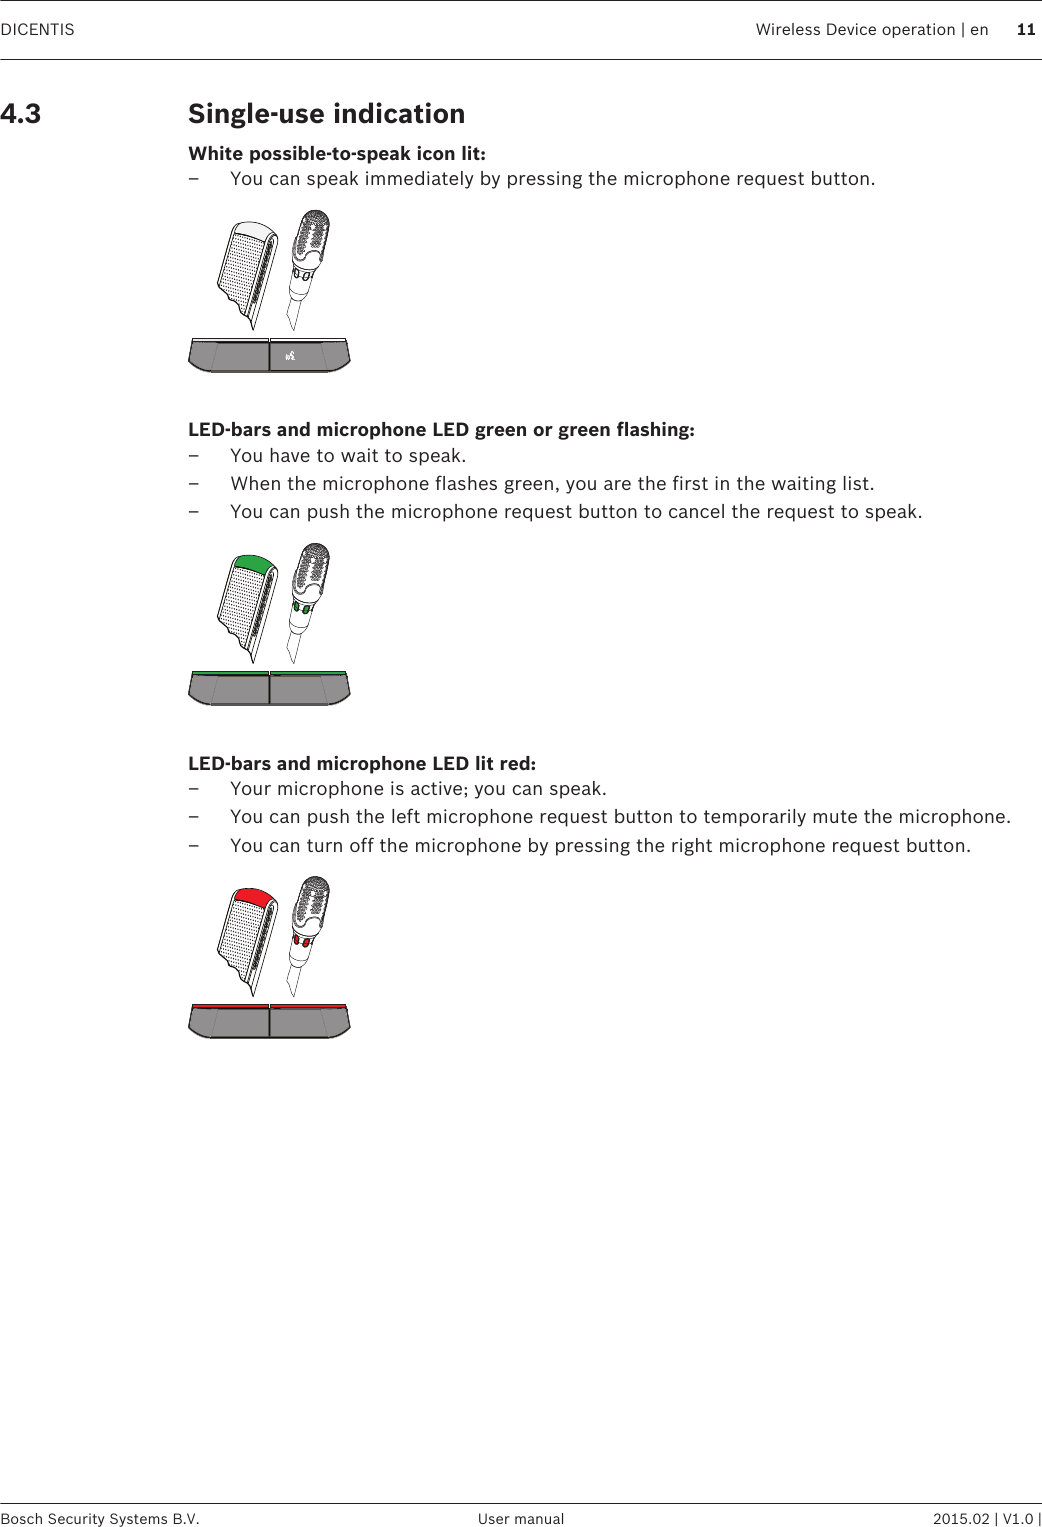 Single-use indicationWhite possible-to-speak icon lit:– You can speak immediately by pressing the microphone request button. LED-bars and microphone LED green or green flashing:– You have to wait to speak.– When the microphone flashes green, you are the first in the waiting list.– You can push the microphone request button to cancel the request to speak. LED-bars and microphone LED lit red:– Your microphone is active; you can speak.– You can push the left microphone request button to temporarily mute the microphone.– You can turn off the microphone by pressing the right microphone request button. 4.3DICENTIS Wireless Device operation | en 11Bosch Security Systems B.V. User manual 2015.02 | V1.0 |